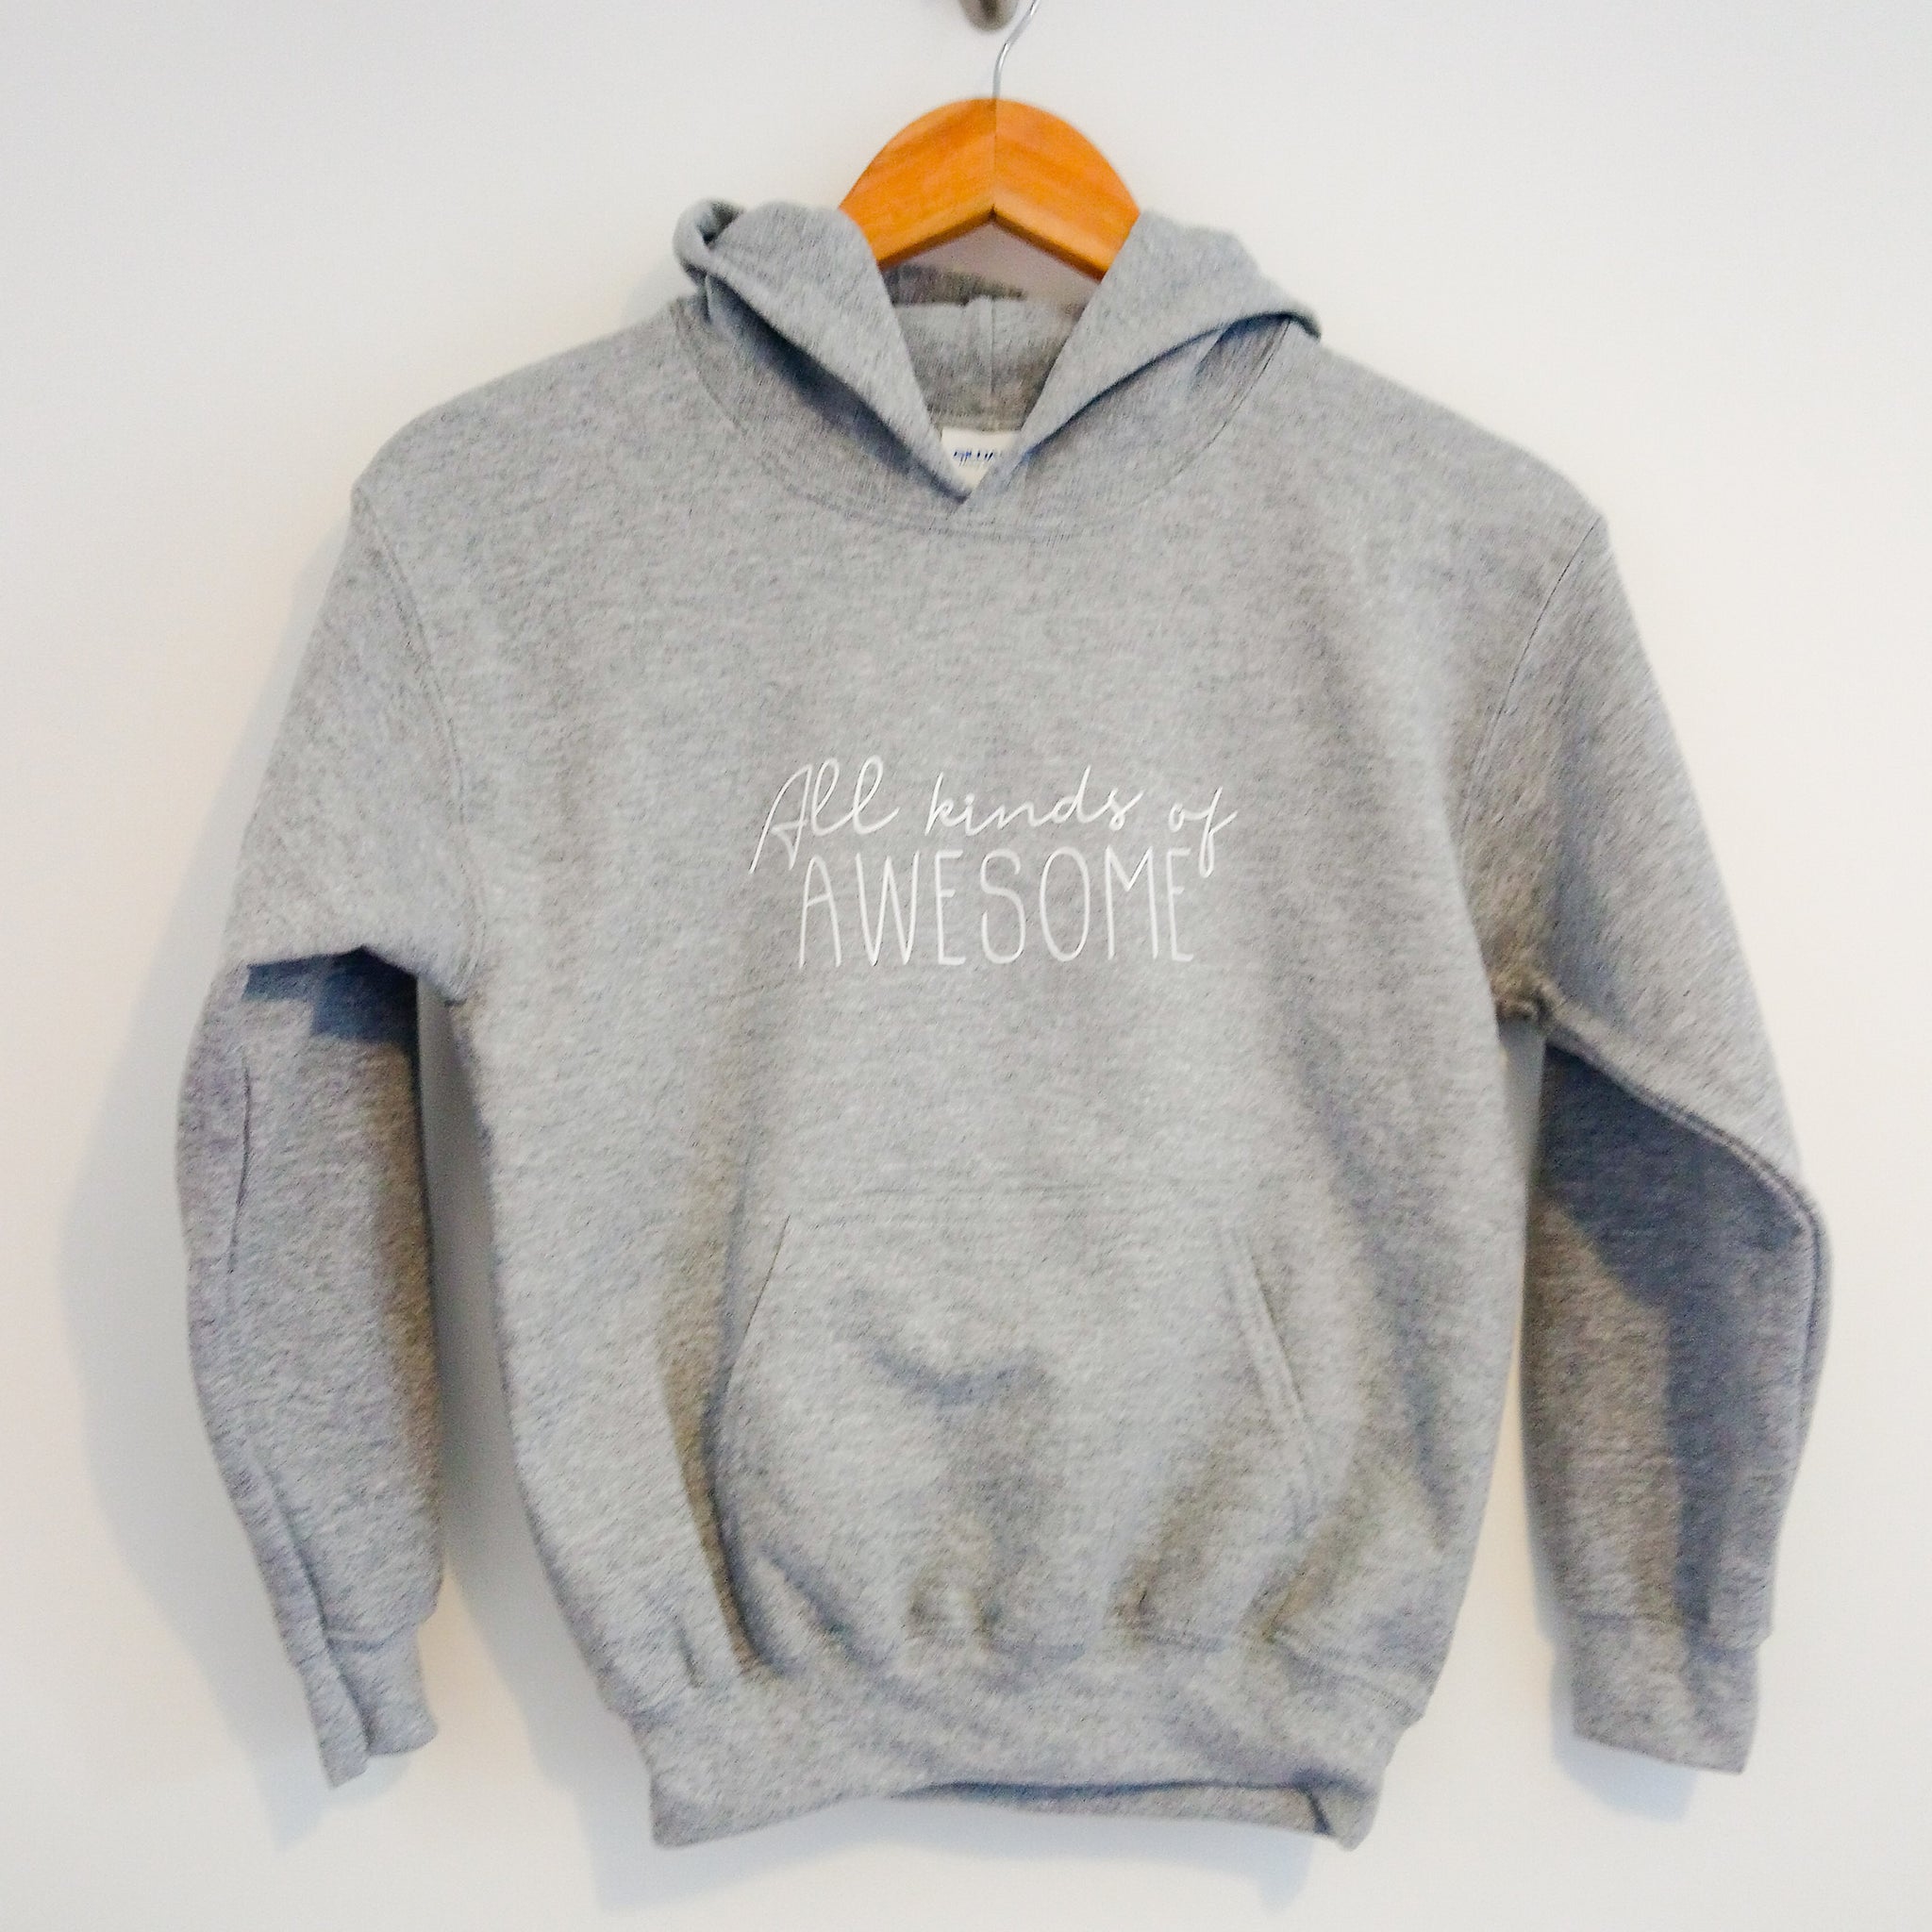 Super cute "All kinds of awesome" unisex kids childrens hoodie